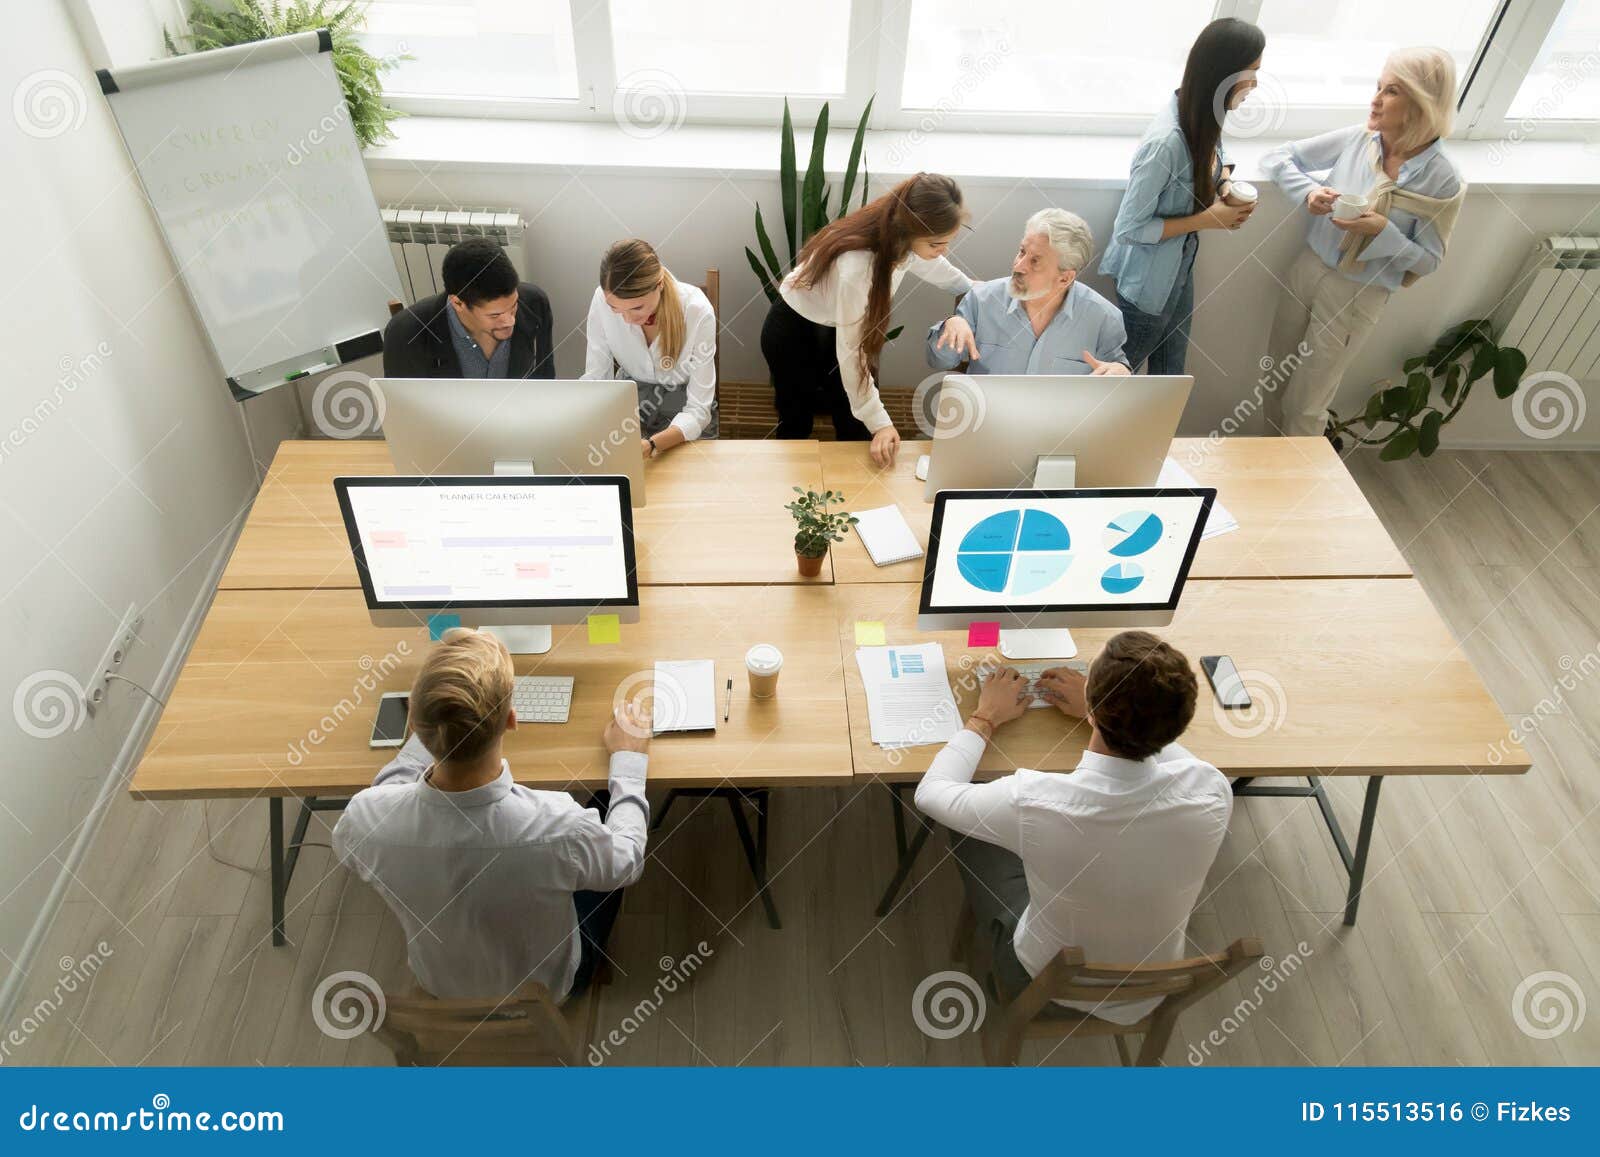 corporate staff working in office together using computers and t